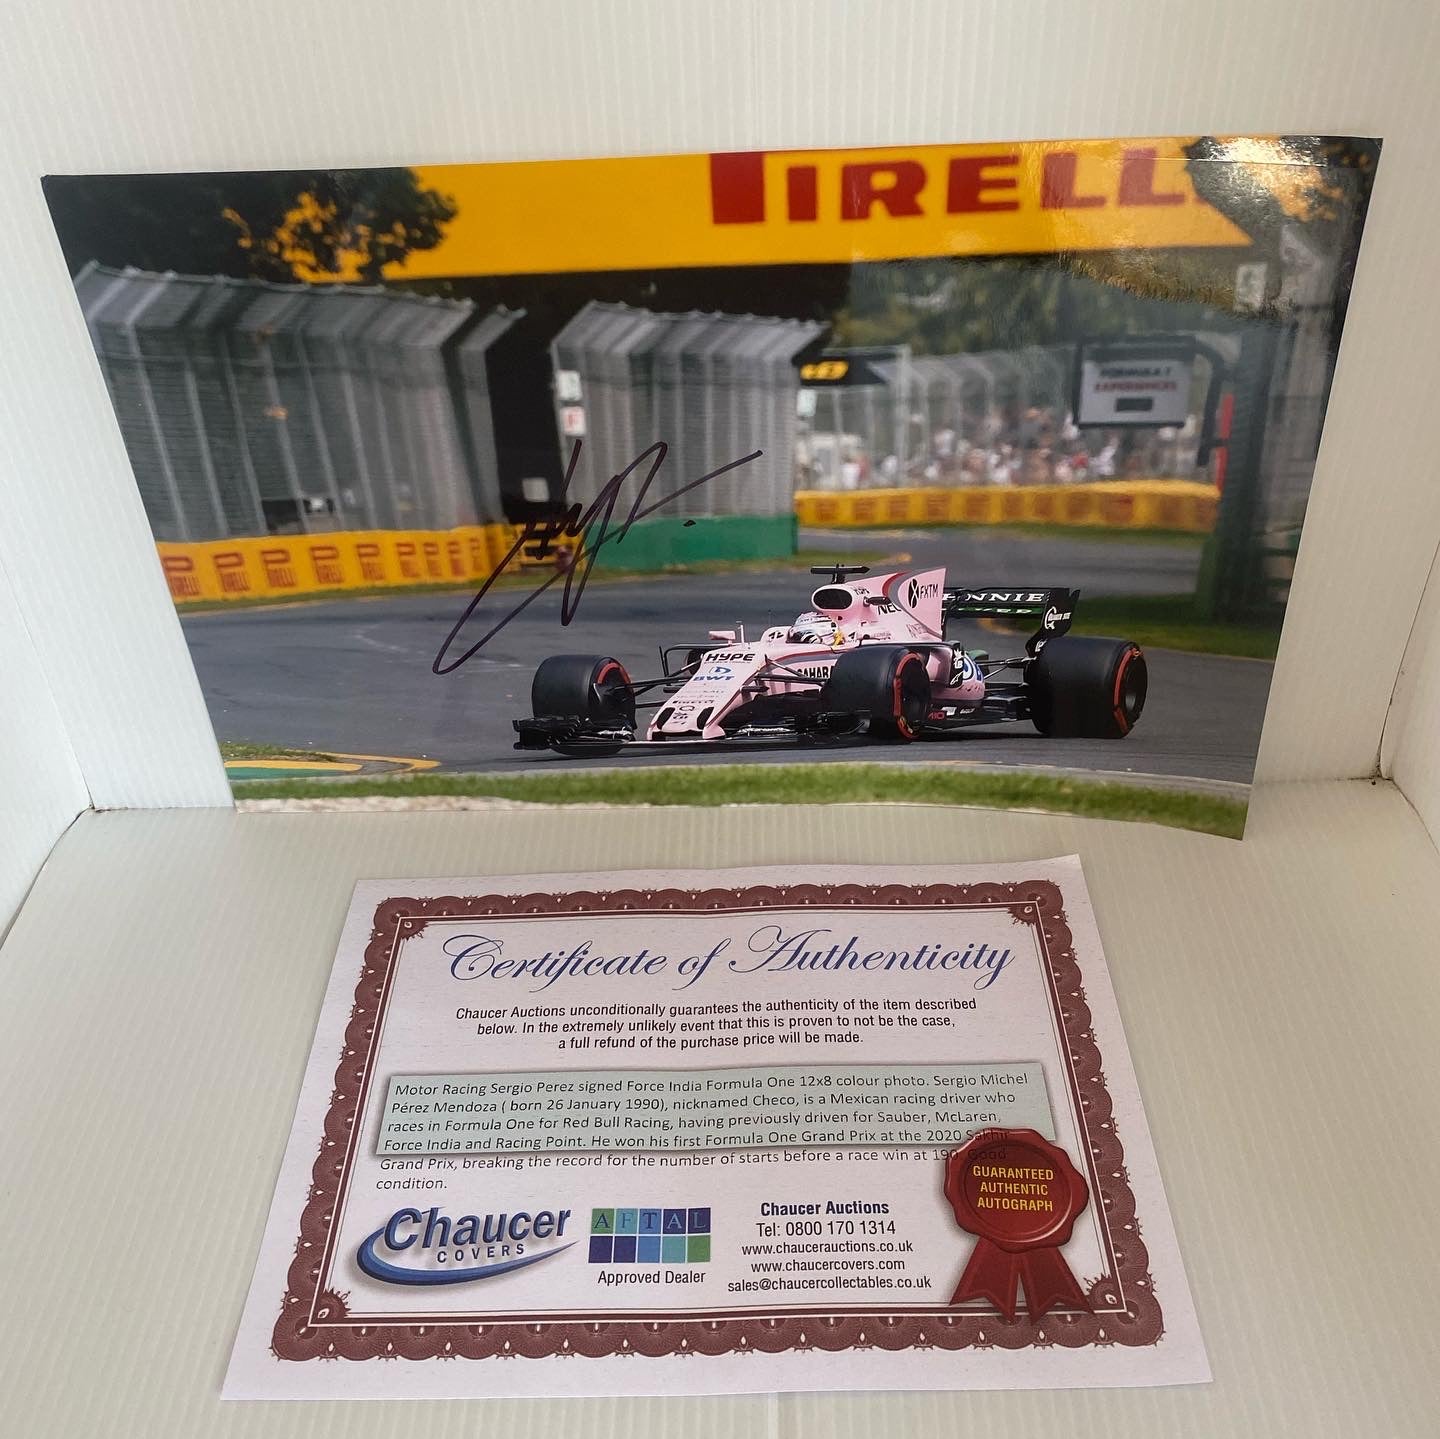 Motor Racing Sergio Perez signed Force India Formula. Come with a Certificate of Authenticity.